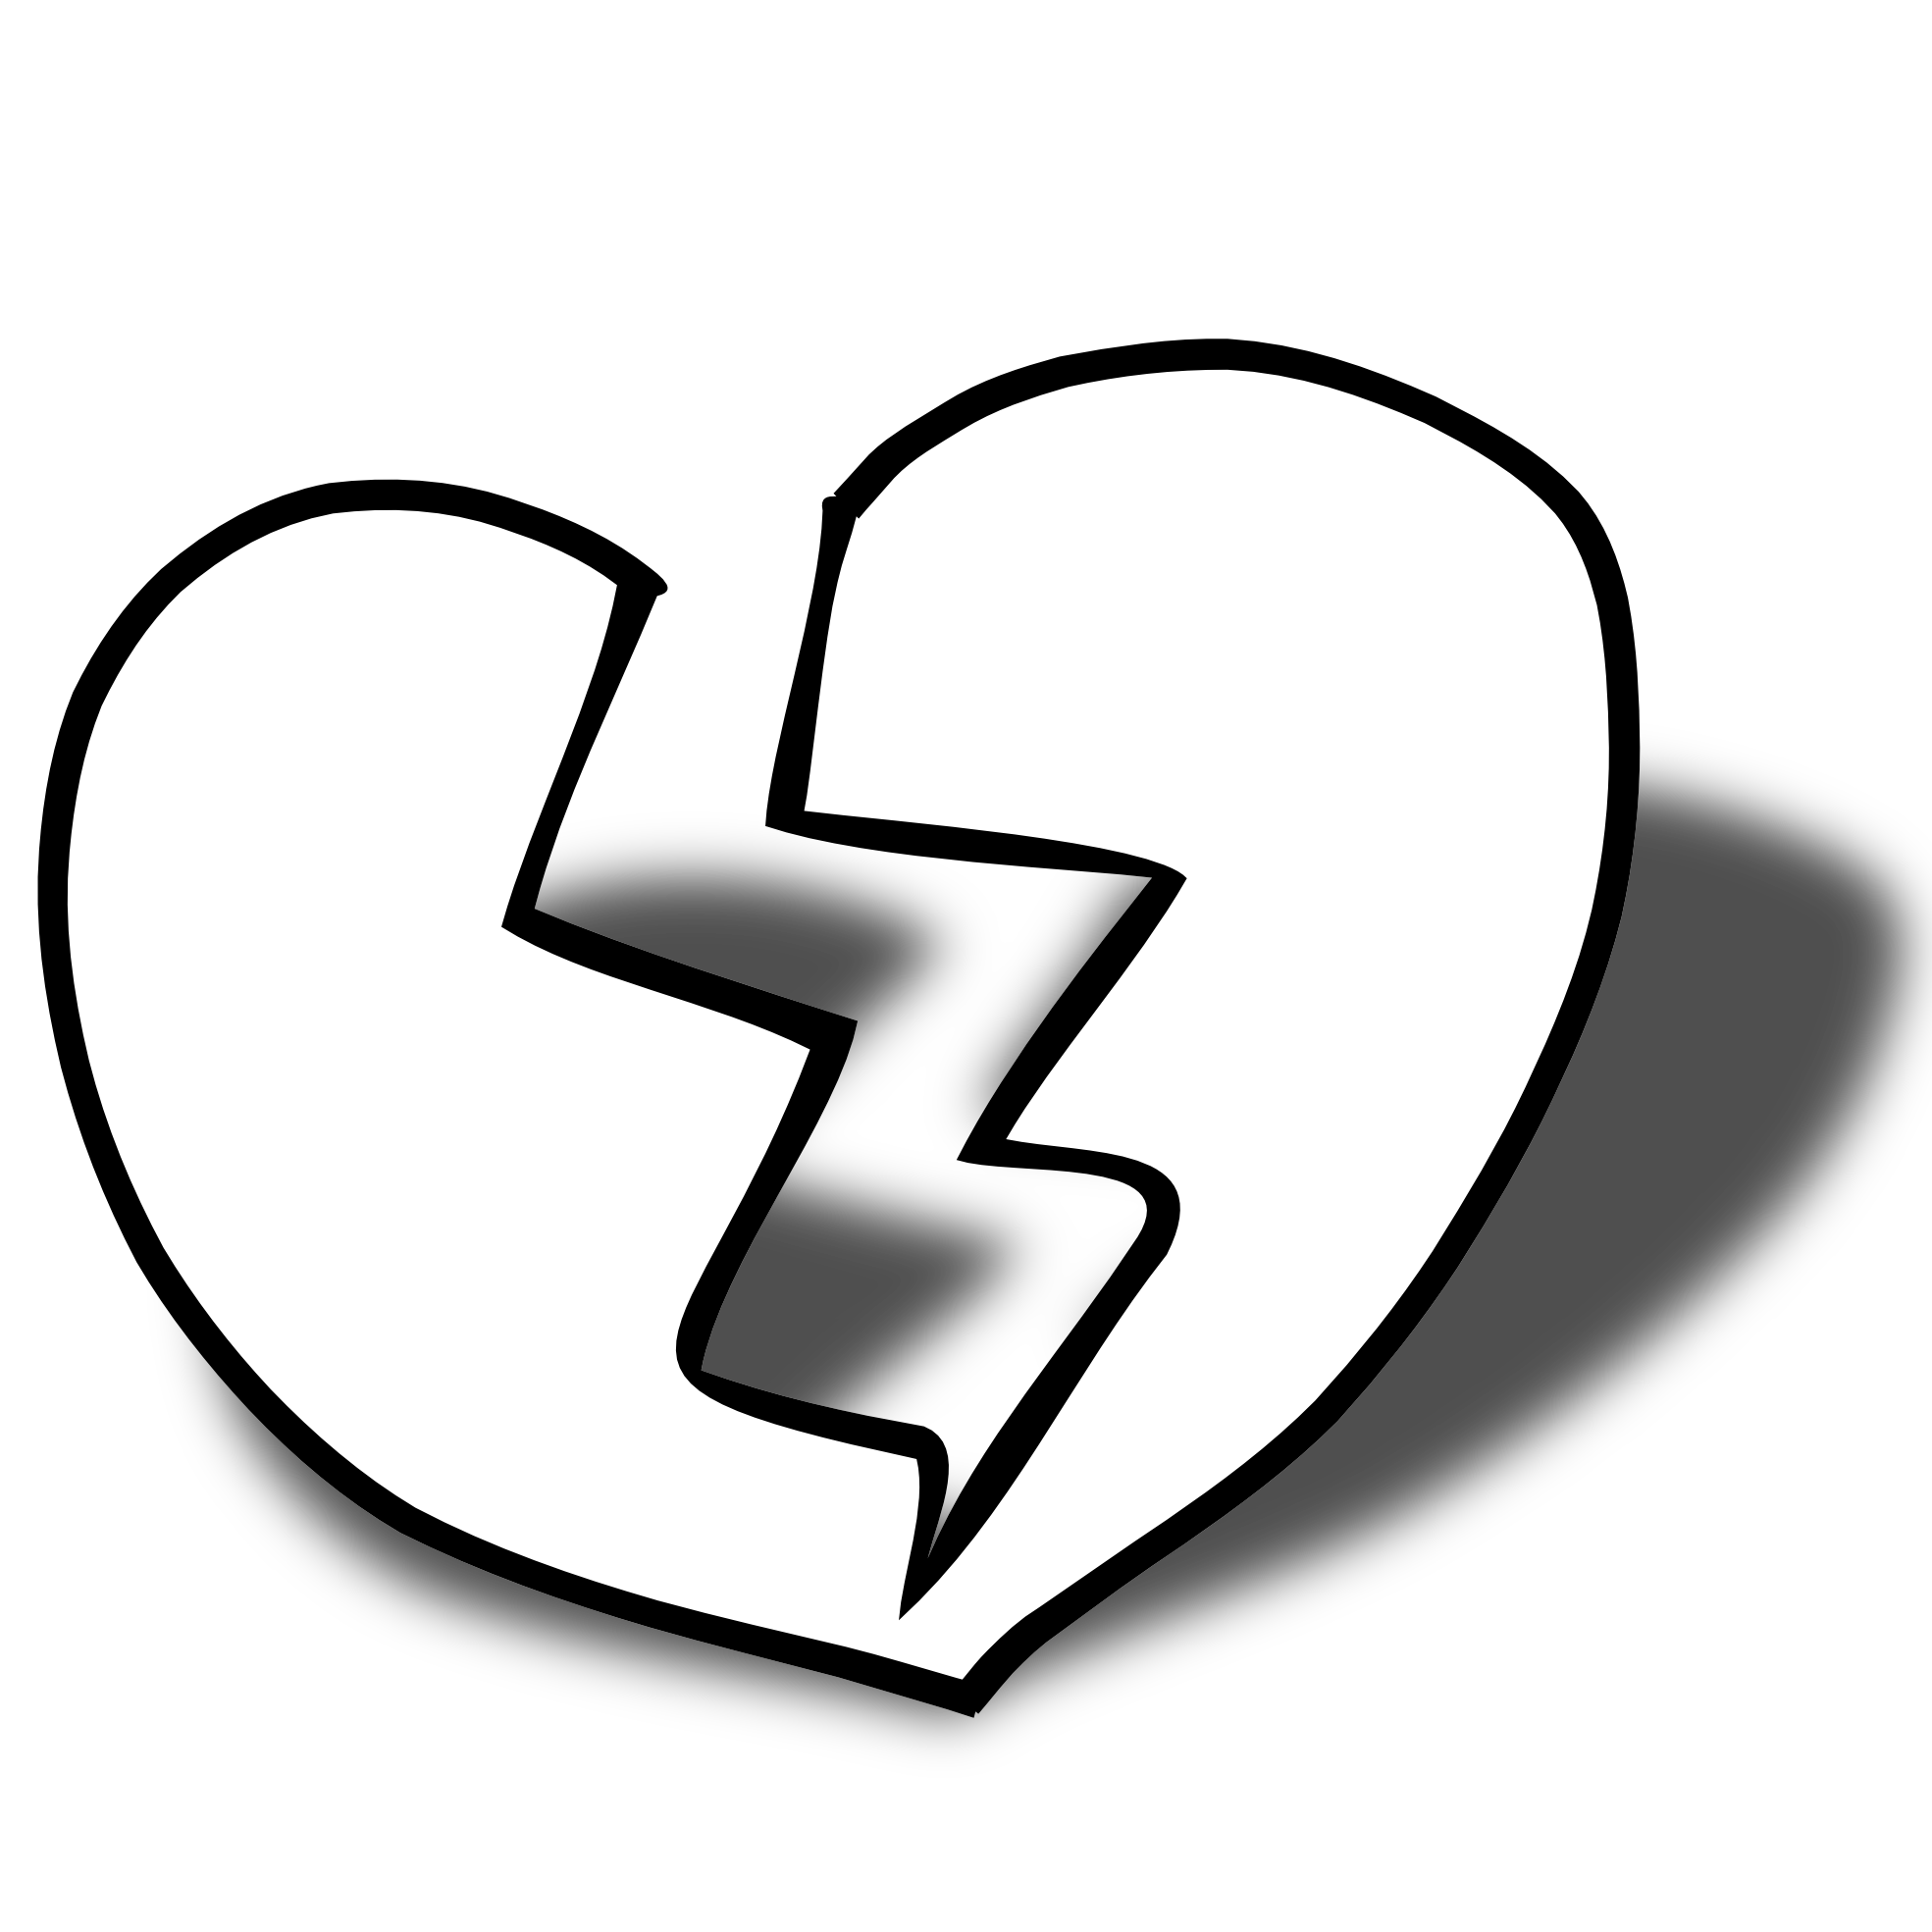 Clipart Heart Black And White - Clipart library